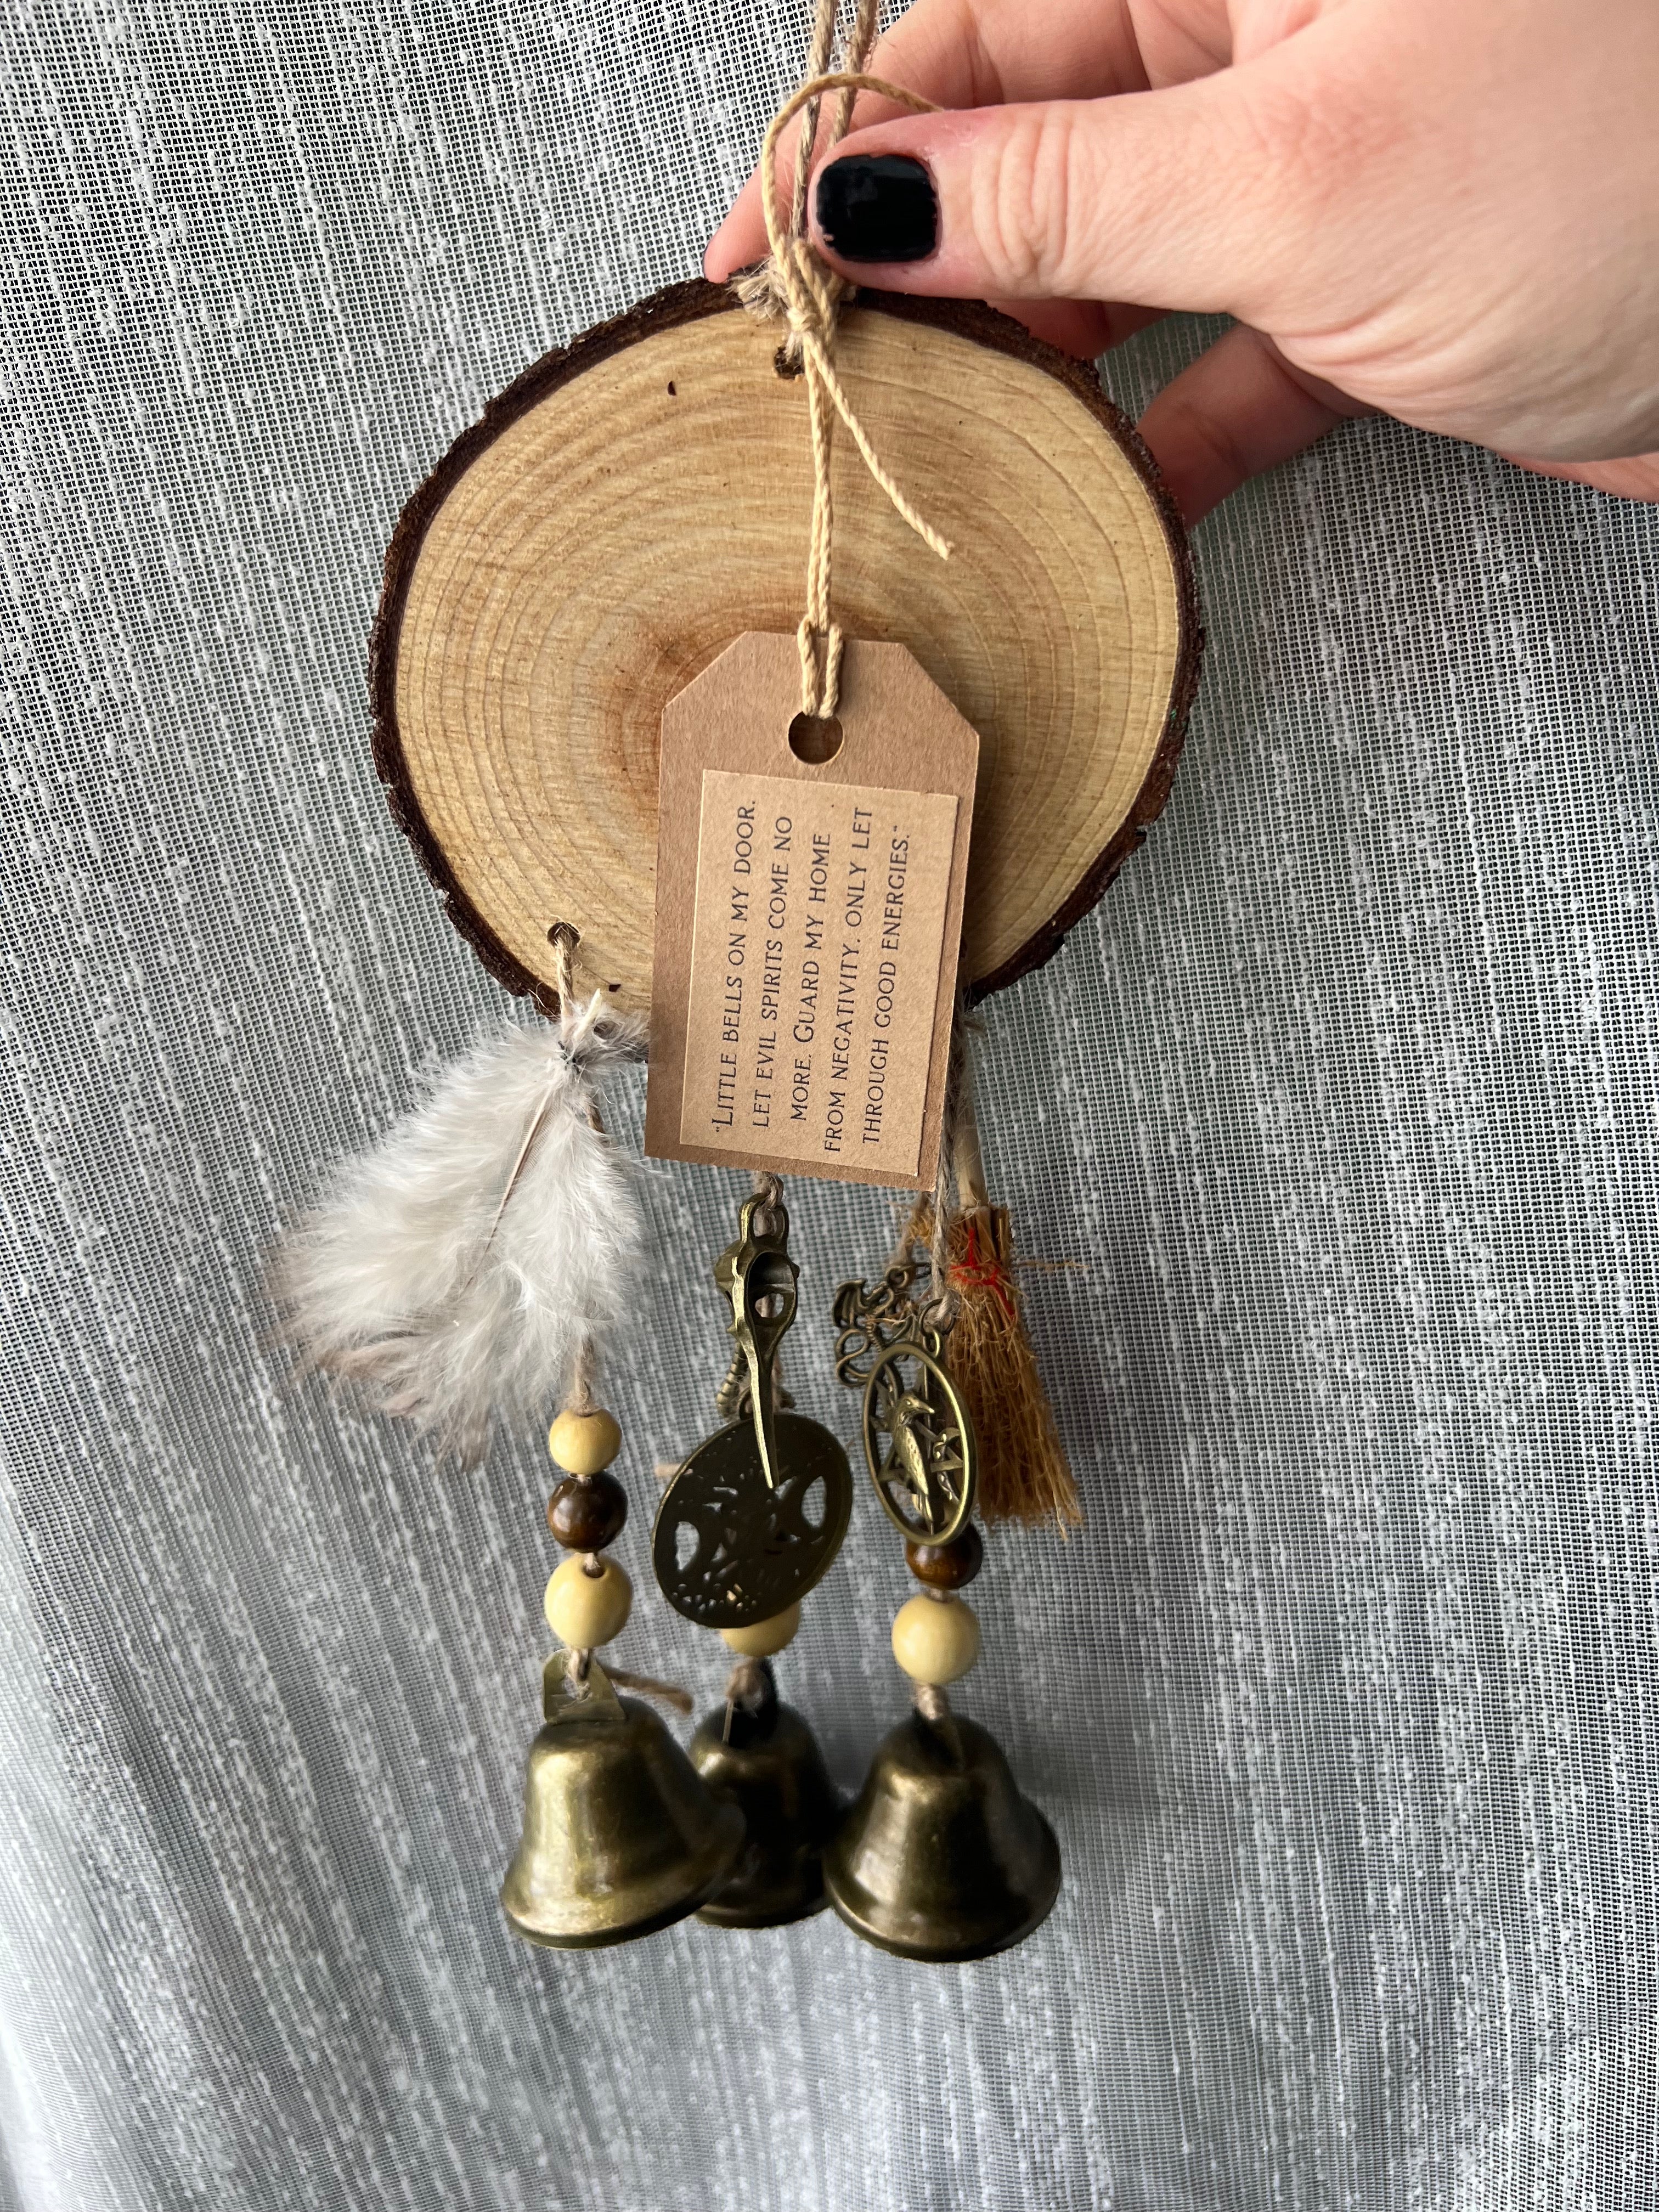 Handmade Witches Bells- Big Witch Energy